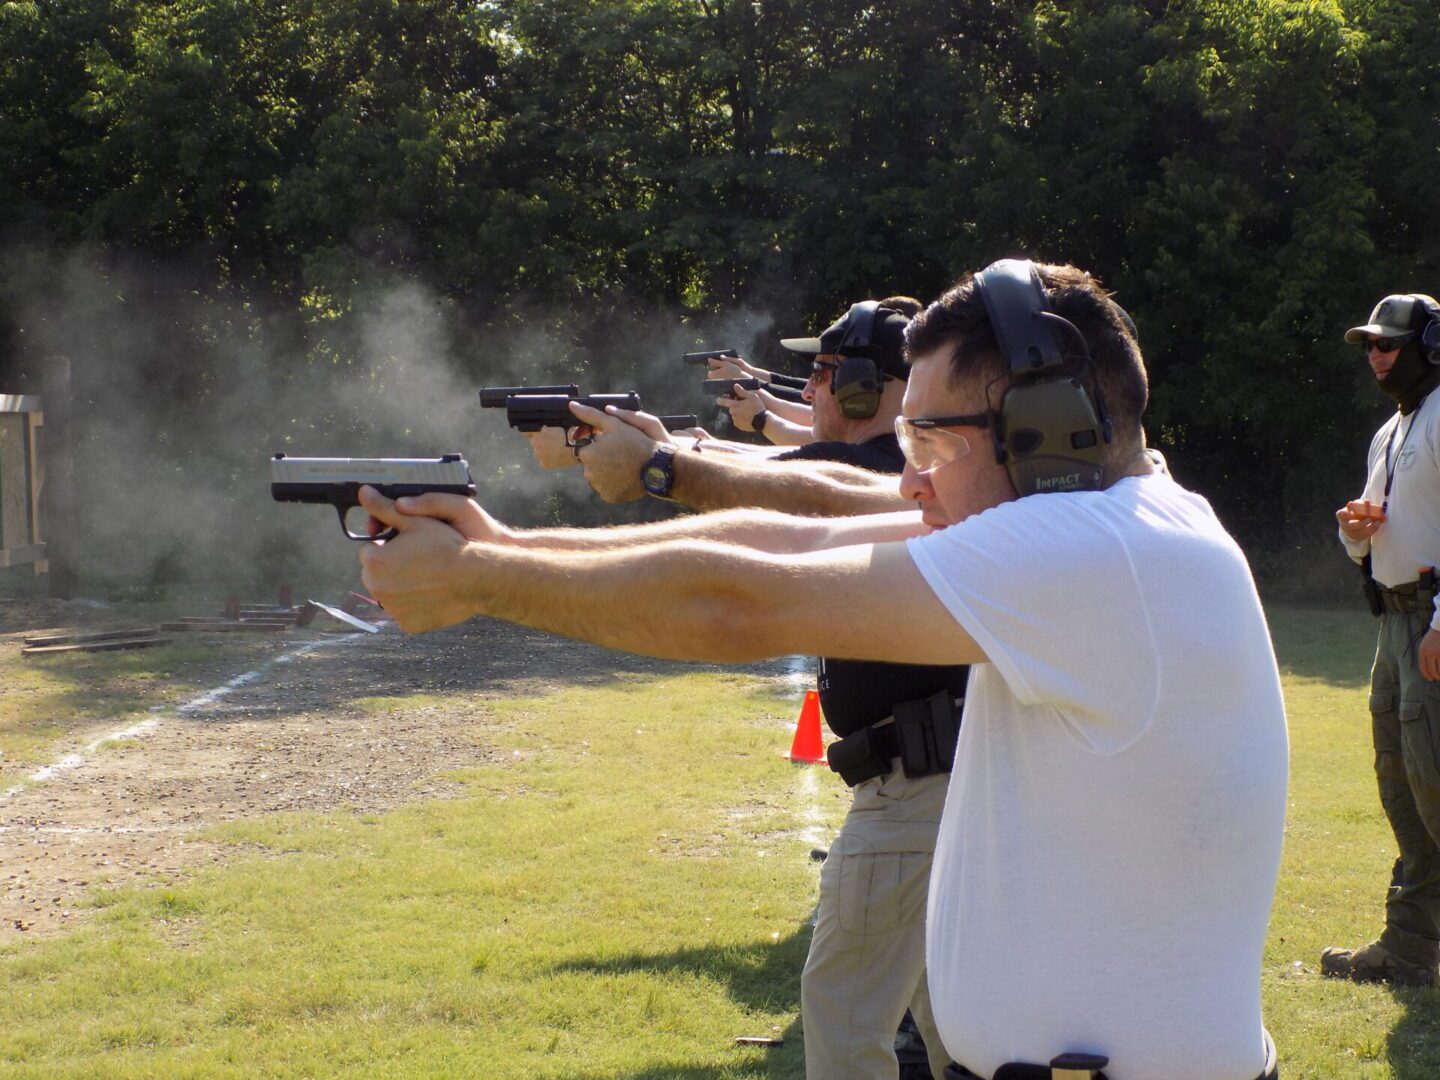 Armed Dallas security guards training